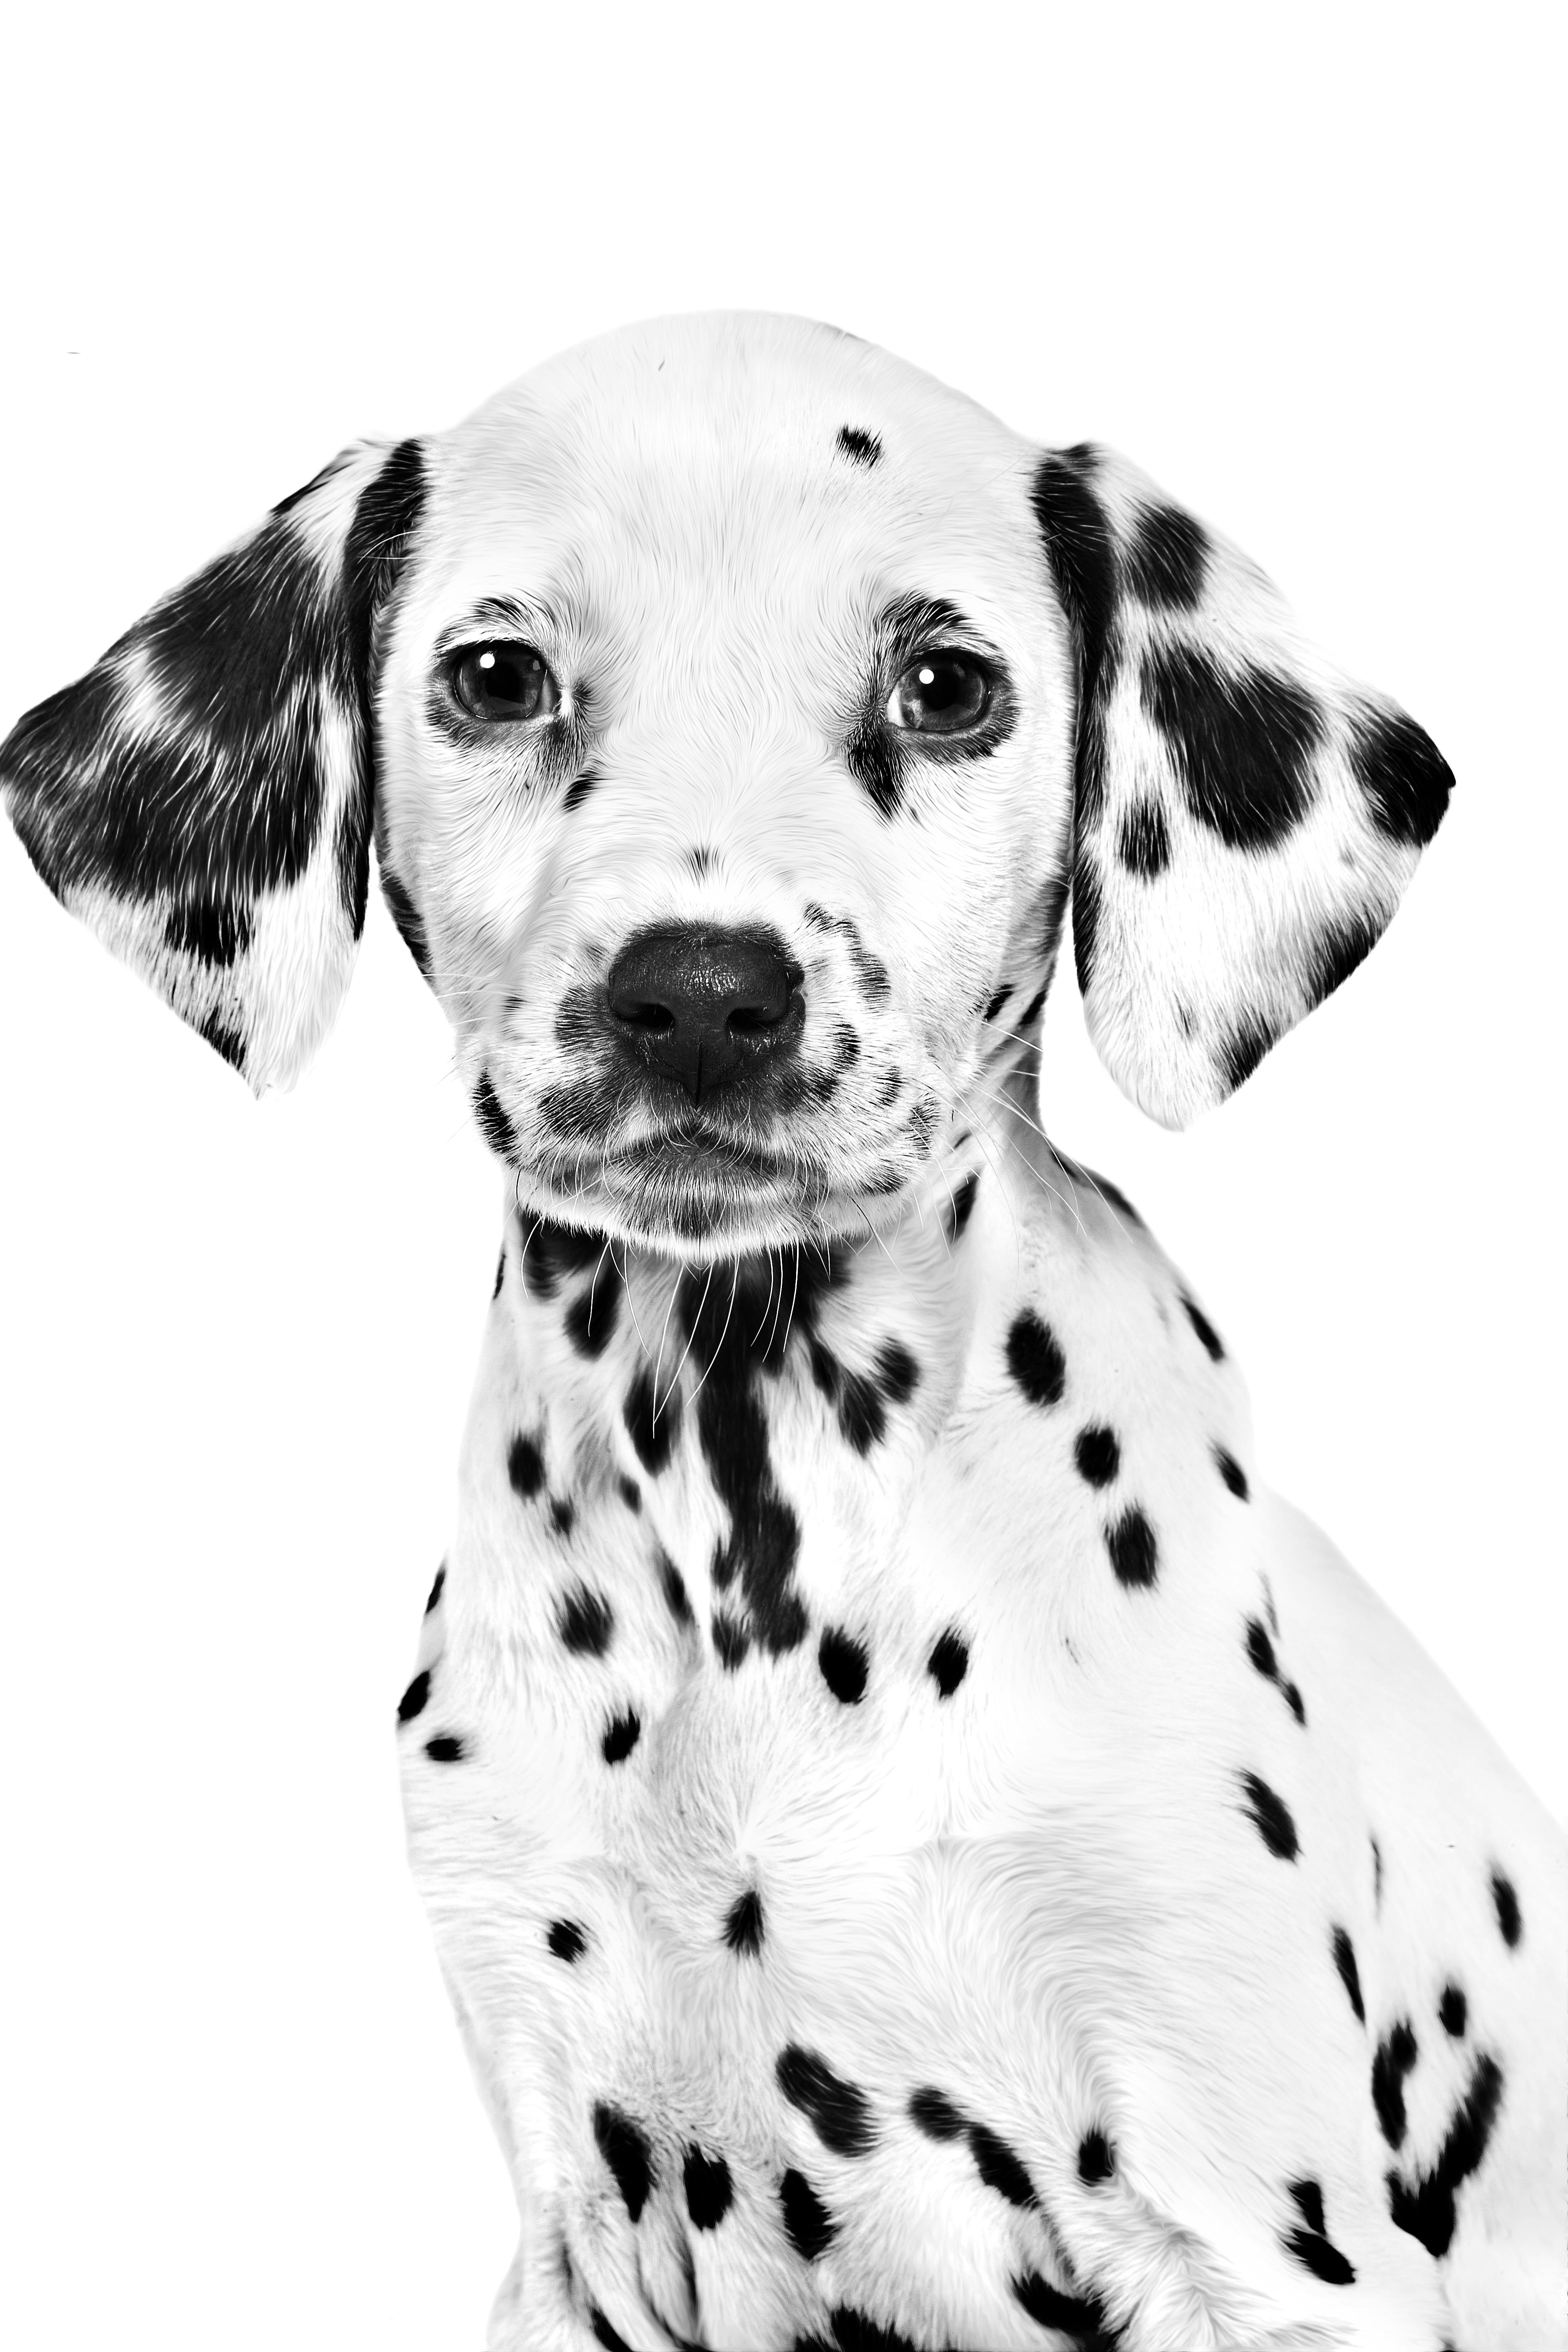 Dalmatian puppy in black and white on a white background